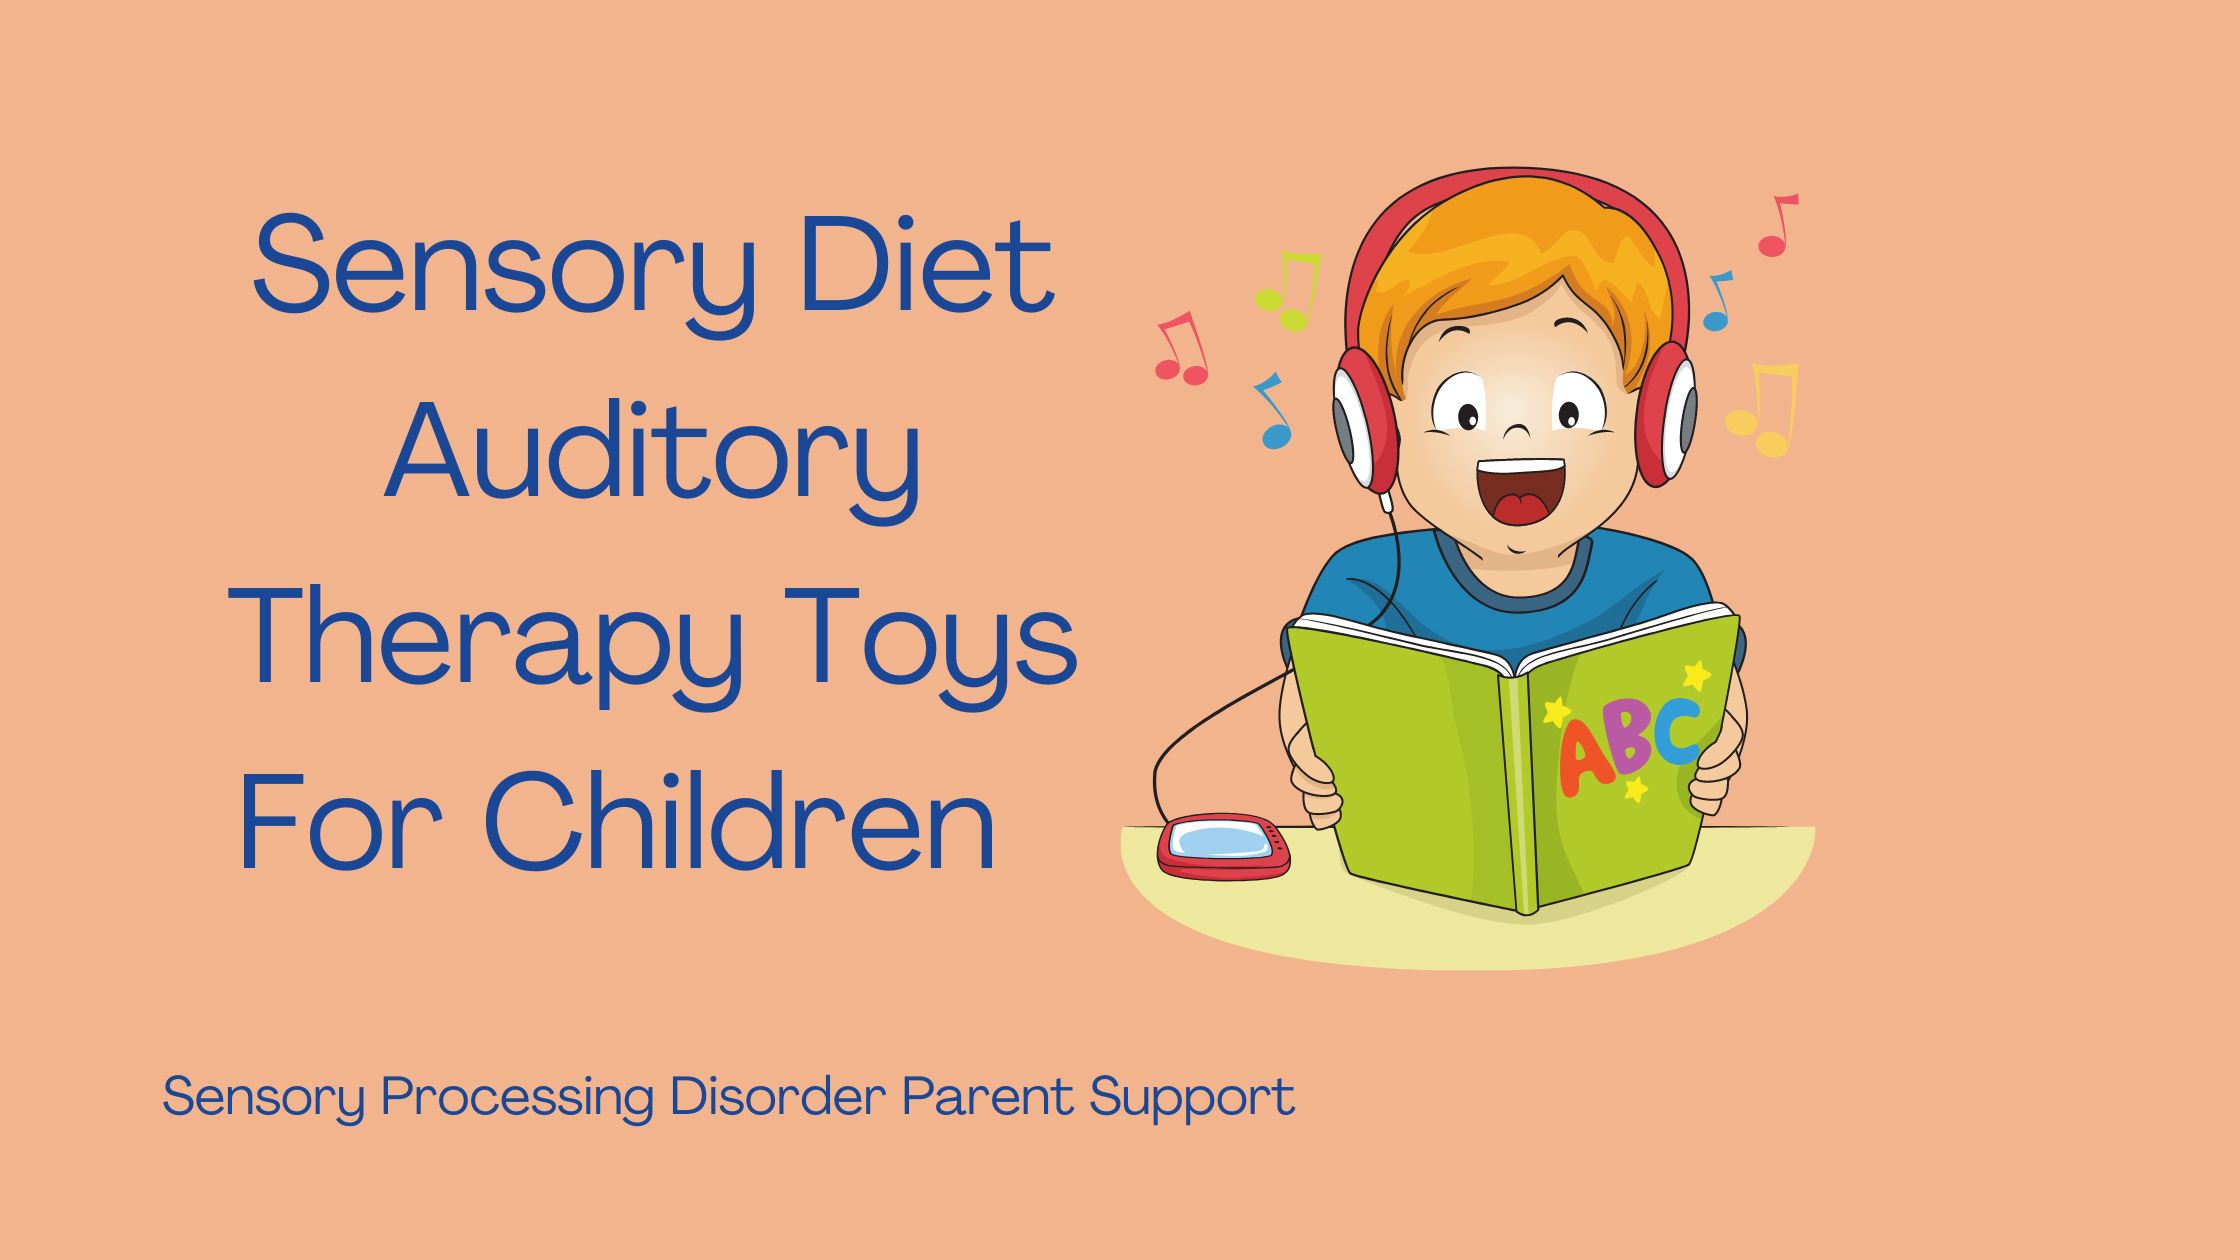 child with sensory processing disorder listening to audio book with headphones on Sensory Diet Auditory Therapy Toys For Children